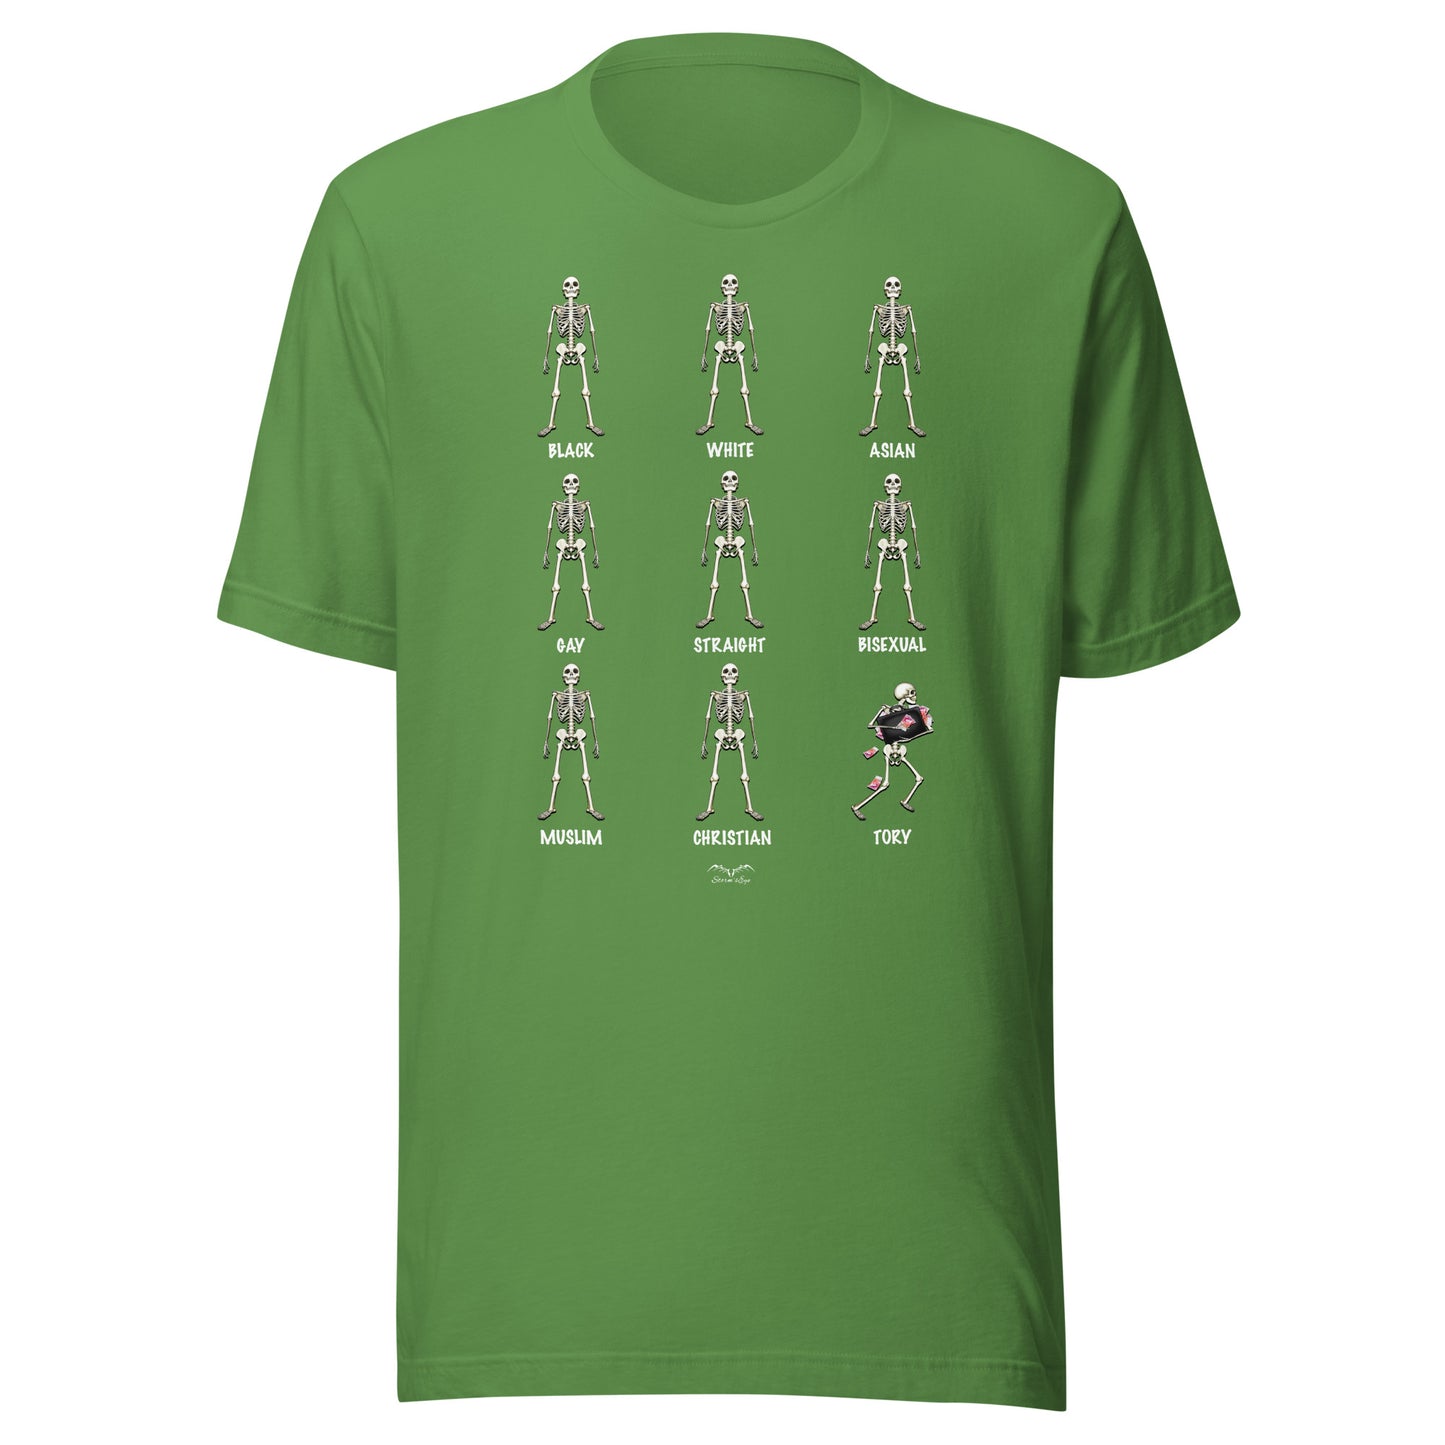 equality anti tory t-shirt bright green, by Stormseye Design